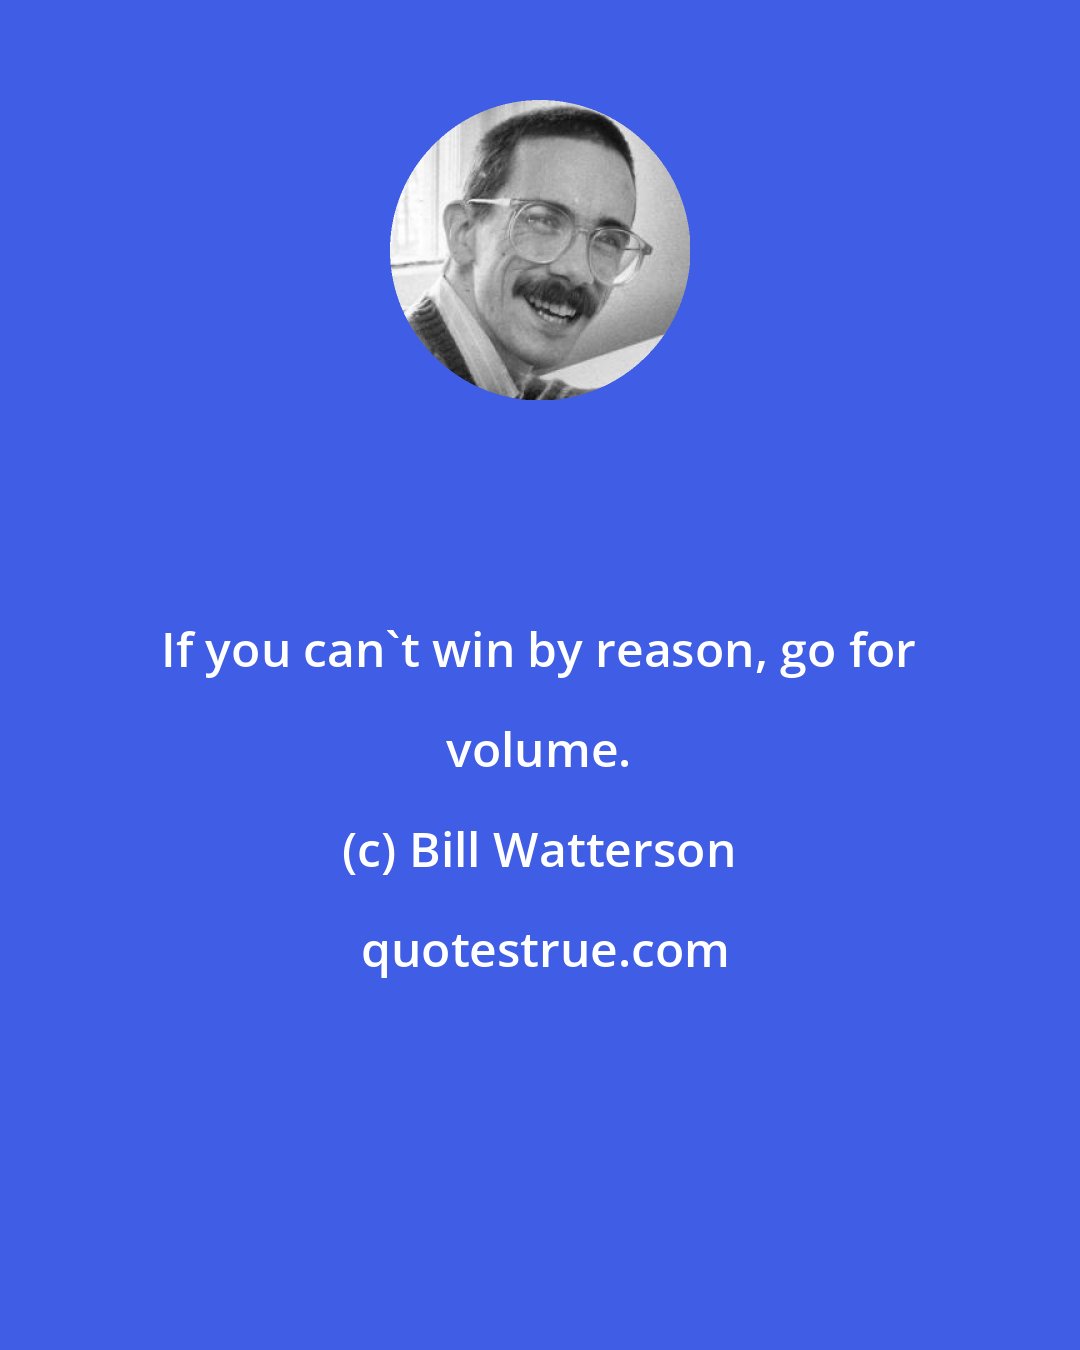 Bill Watterson: If you can't win by reason, go for volume.